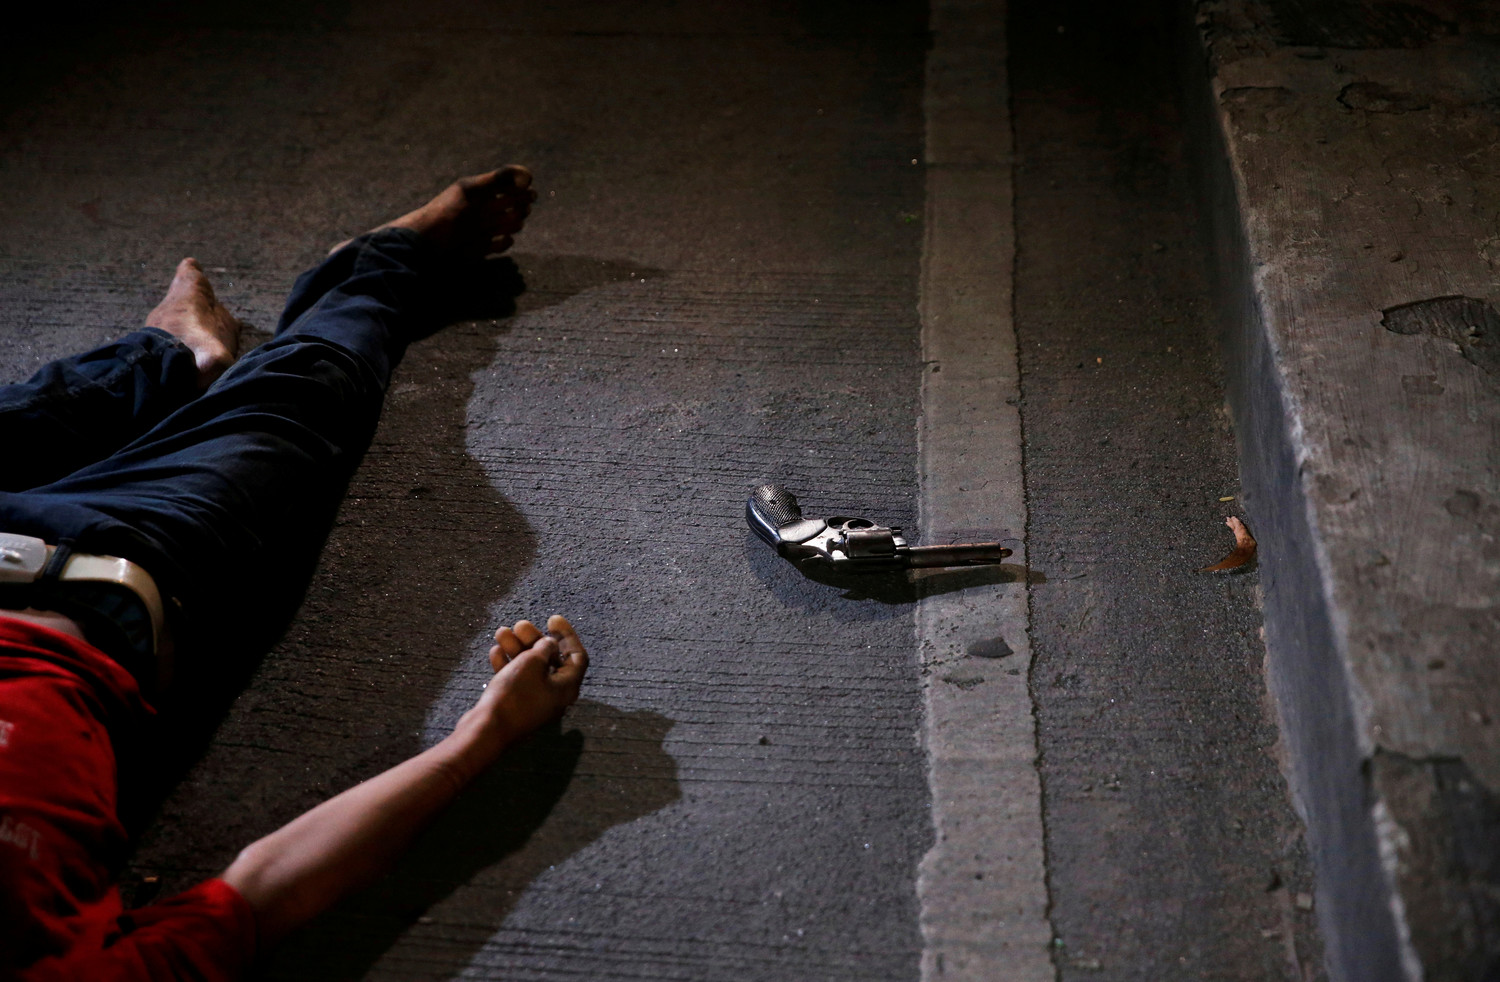 A revolver is seen near the body of a man killed by police after drugs were found in his pockets in Manila, Philippines, Aug. 17, 2017. Catholic bishops in the Philippines broke what they described as their “collective silence” over “many disturbing issues” that have confronted the country in recent months.